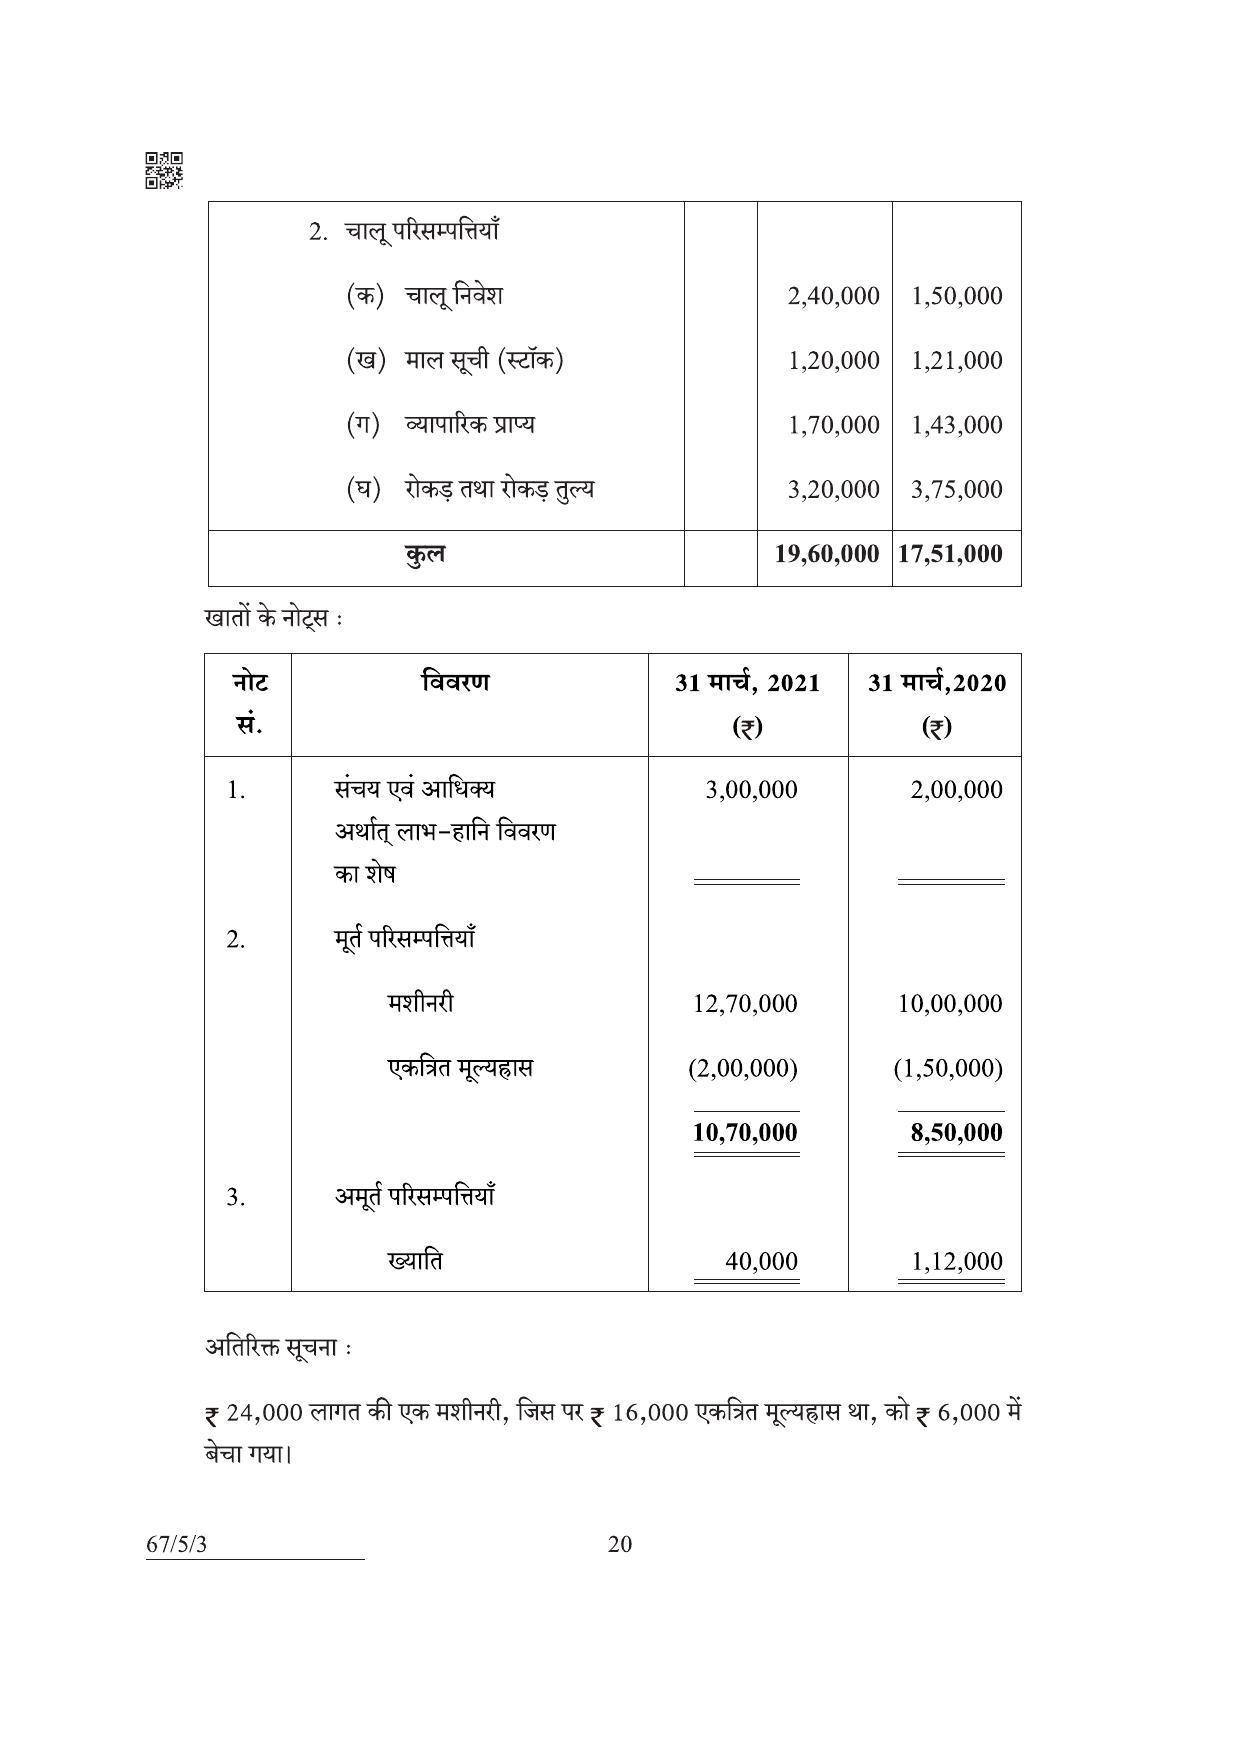 CBSE Class 12 67-5-3 Accountancy 2022 Question Paper - Page 20